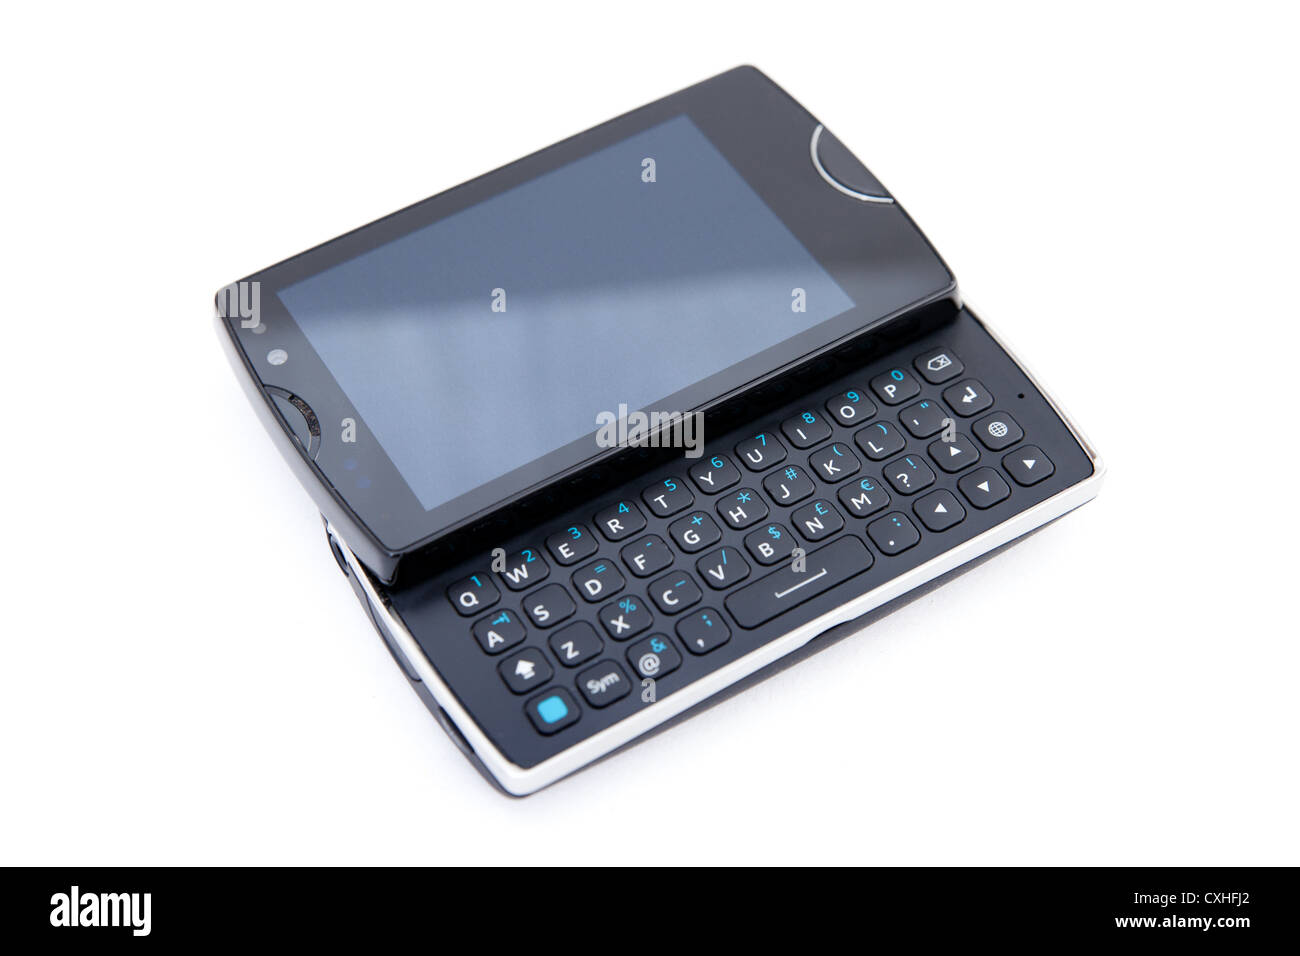 Smart phone with qwerty keyboard Stock Photo